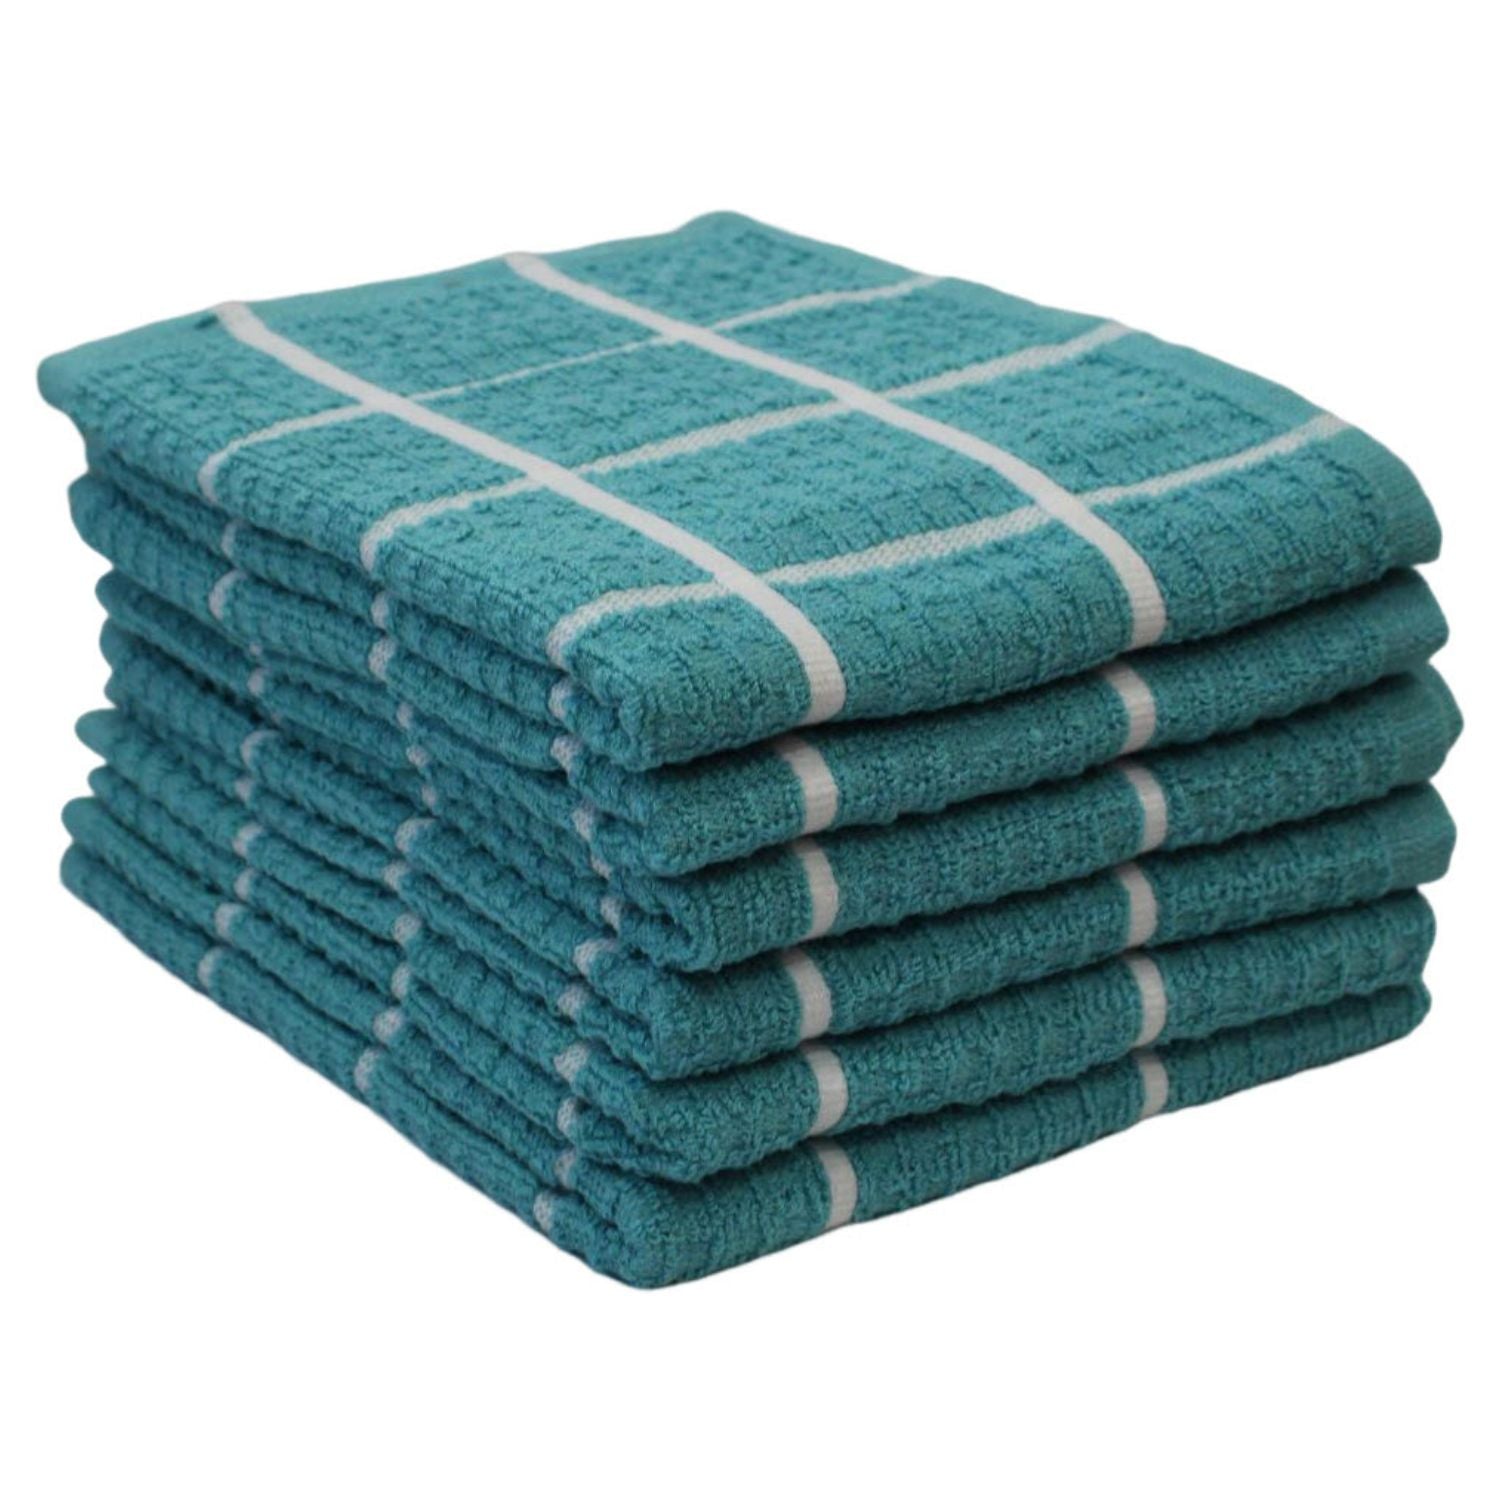 Lushomes Kitchen Cleaning Cloth, Terry Cotton Dish Machine Washable Towels for Home Use, 6 Pcs Teal Blue Checks Hand Towel, Pack of 6 Towel, 16x26 Inches, 360 GSM  (40x65 Cms, Set of 6, Napking for Hand Towels )